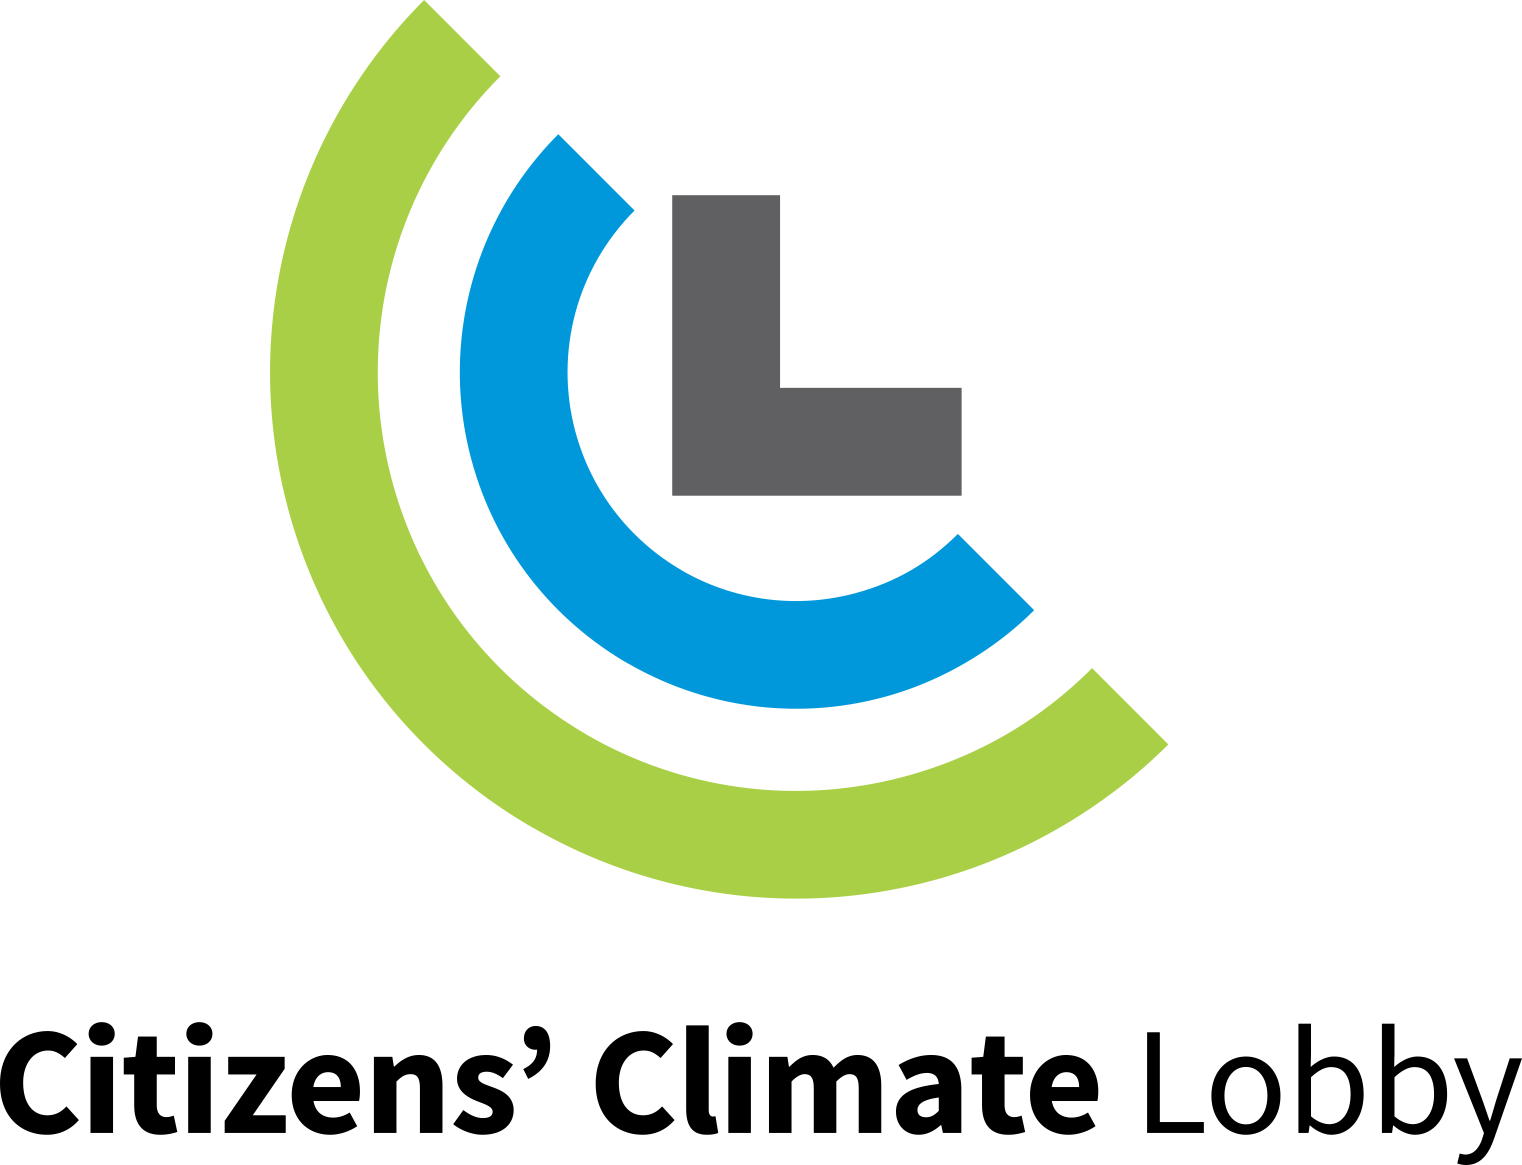 Citizens' Climate Lobby - take action on climate change solutions